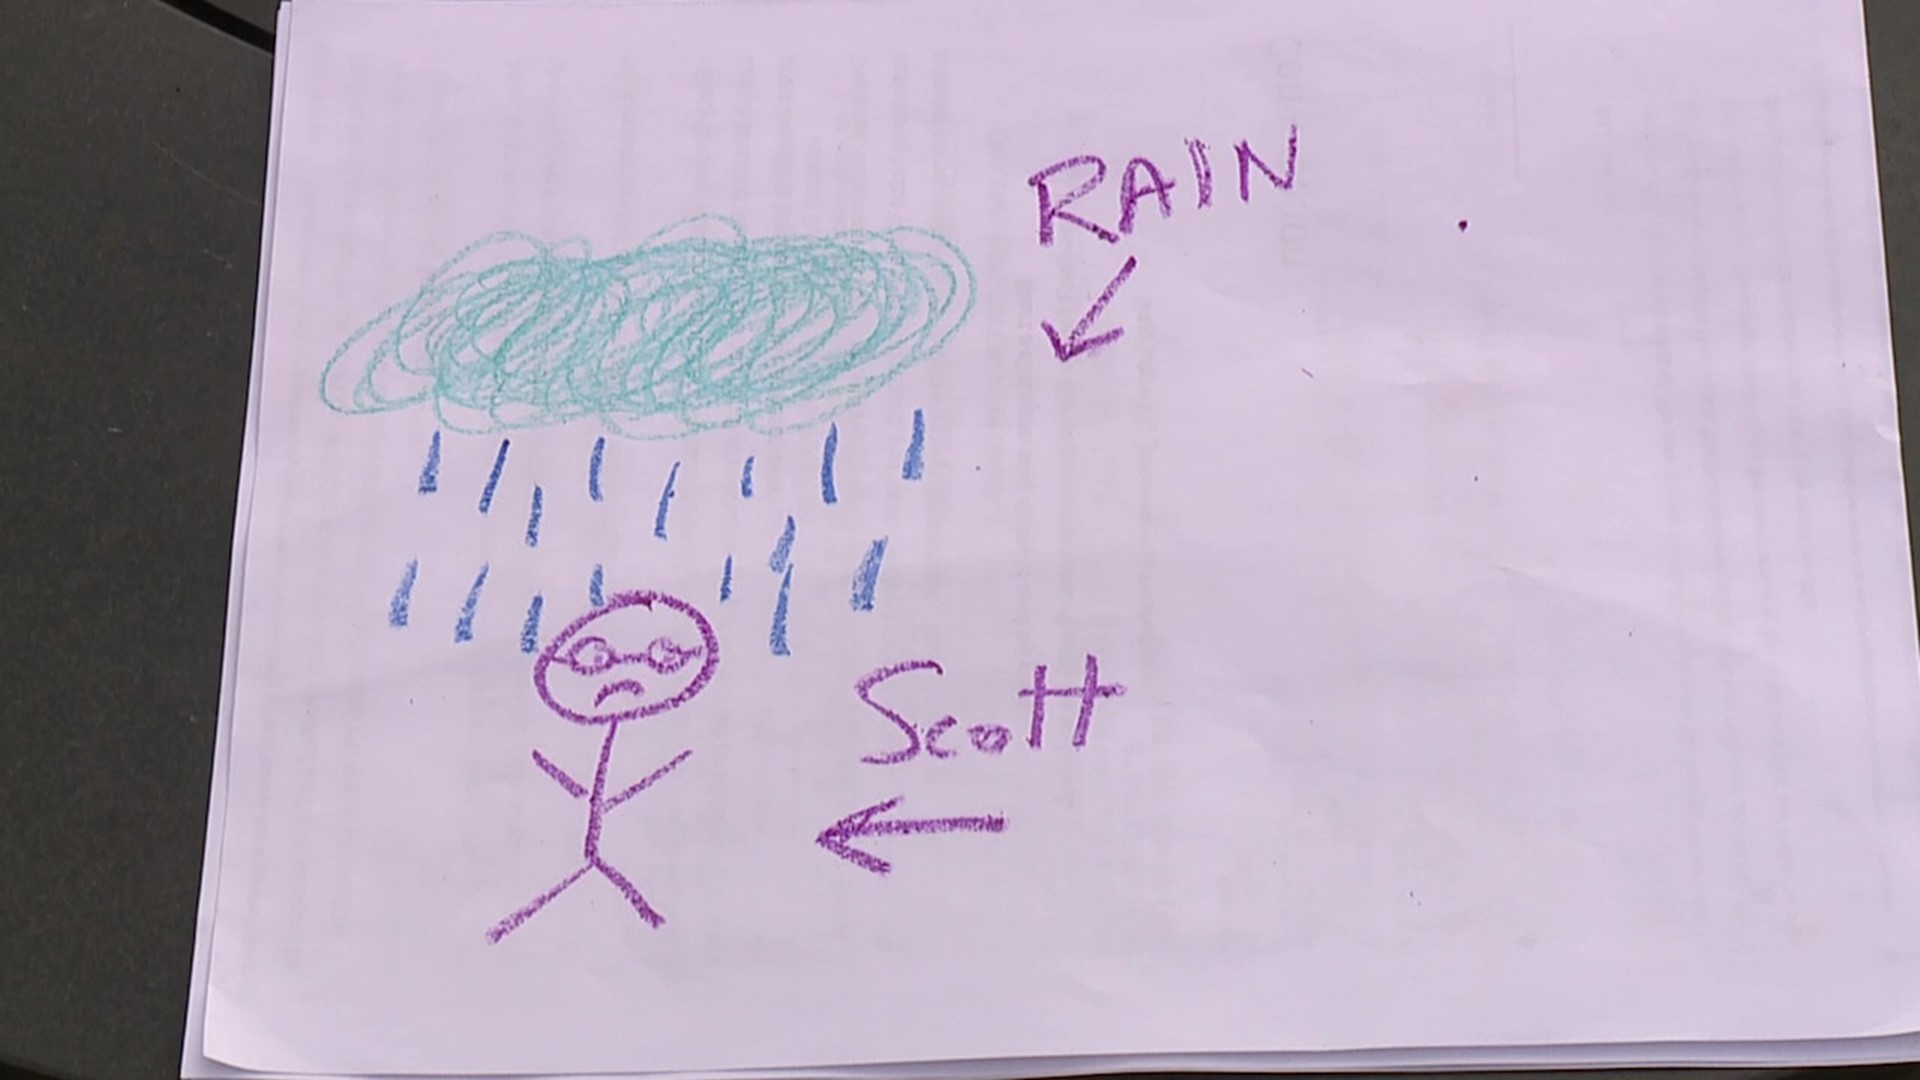 Scott tries to see if callers claiming that launching rockets into outer space is causing heavy rain.